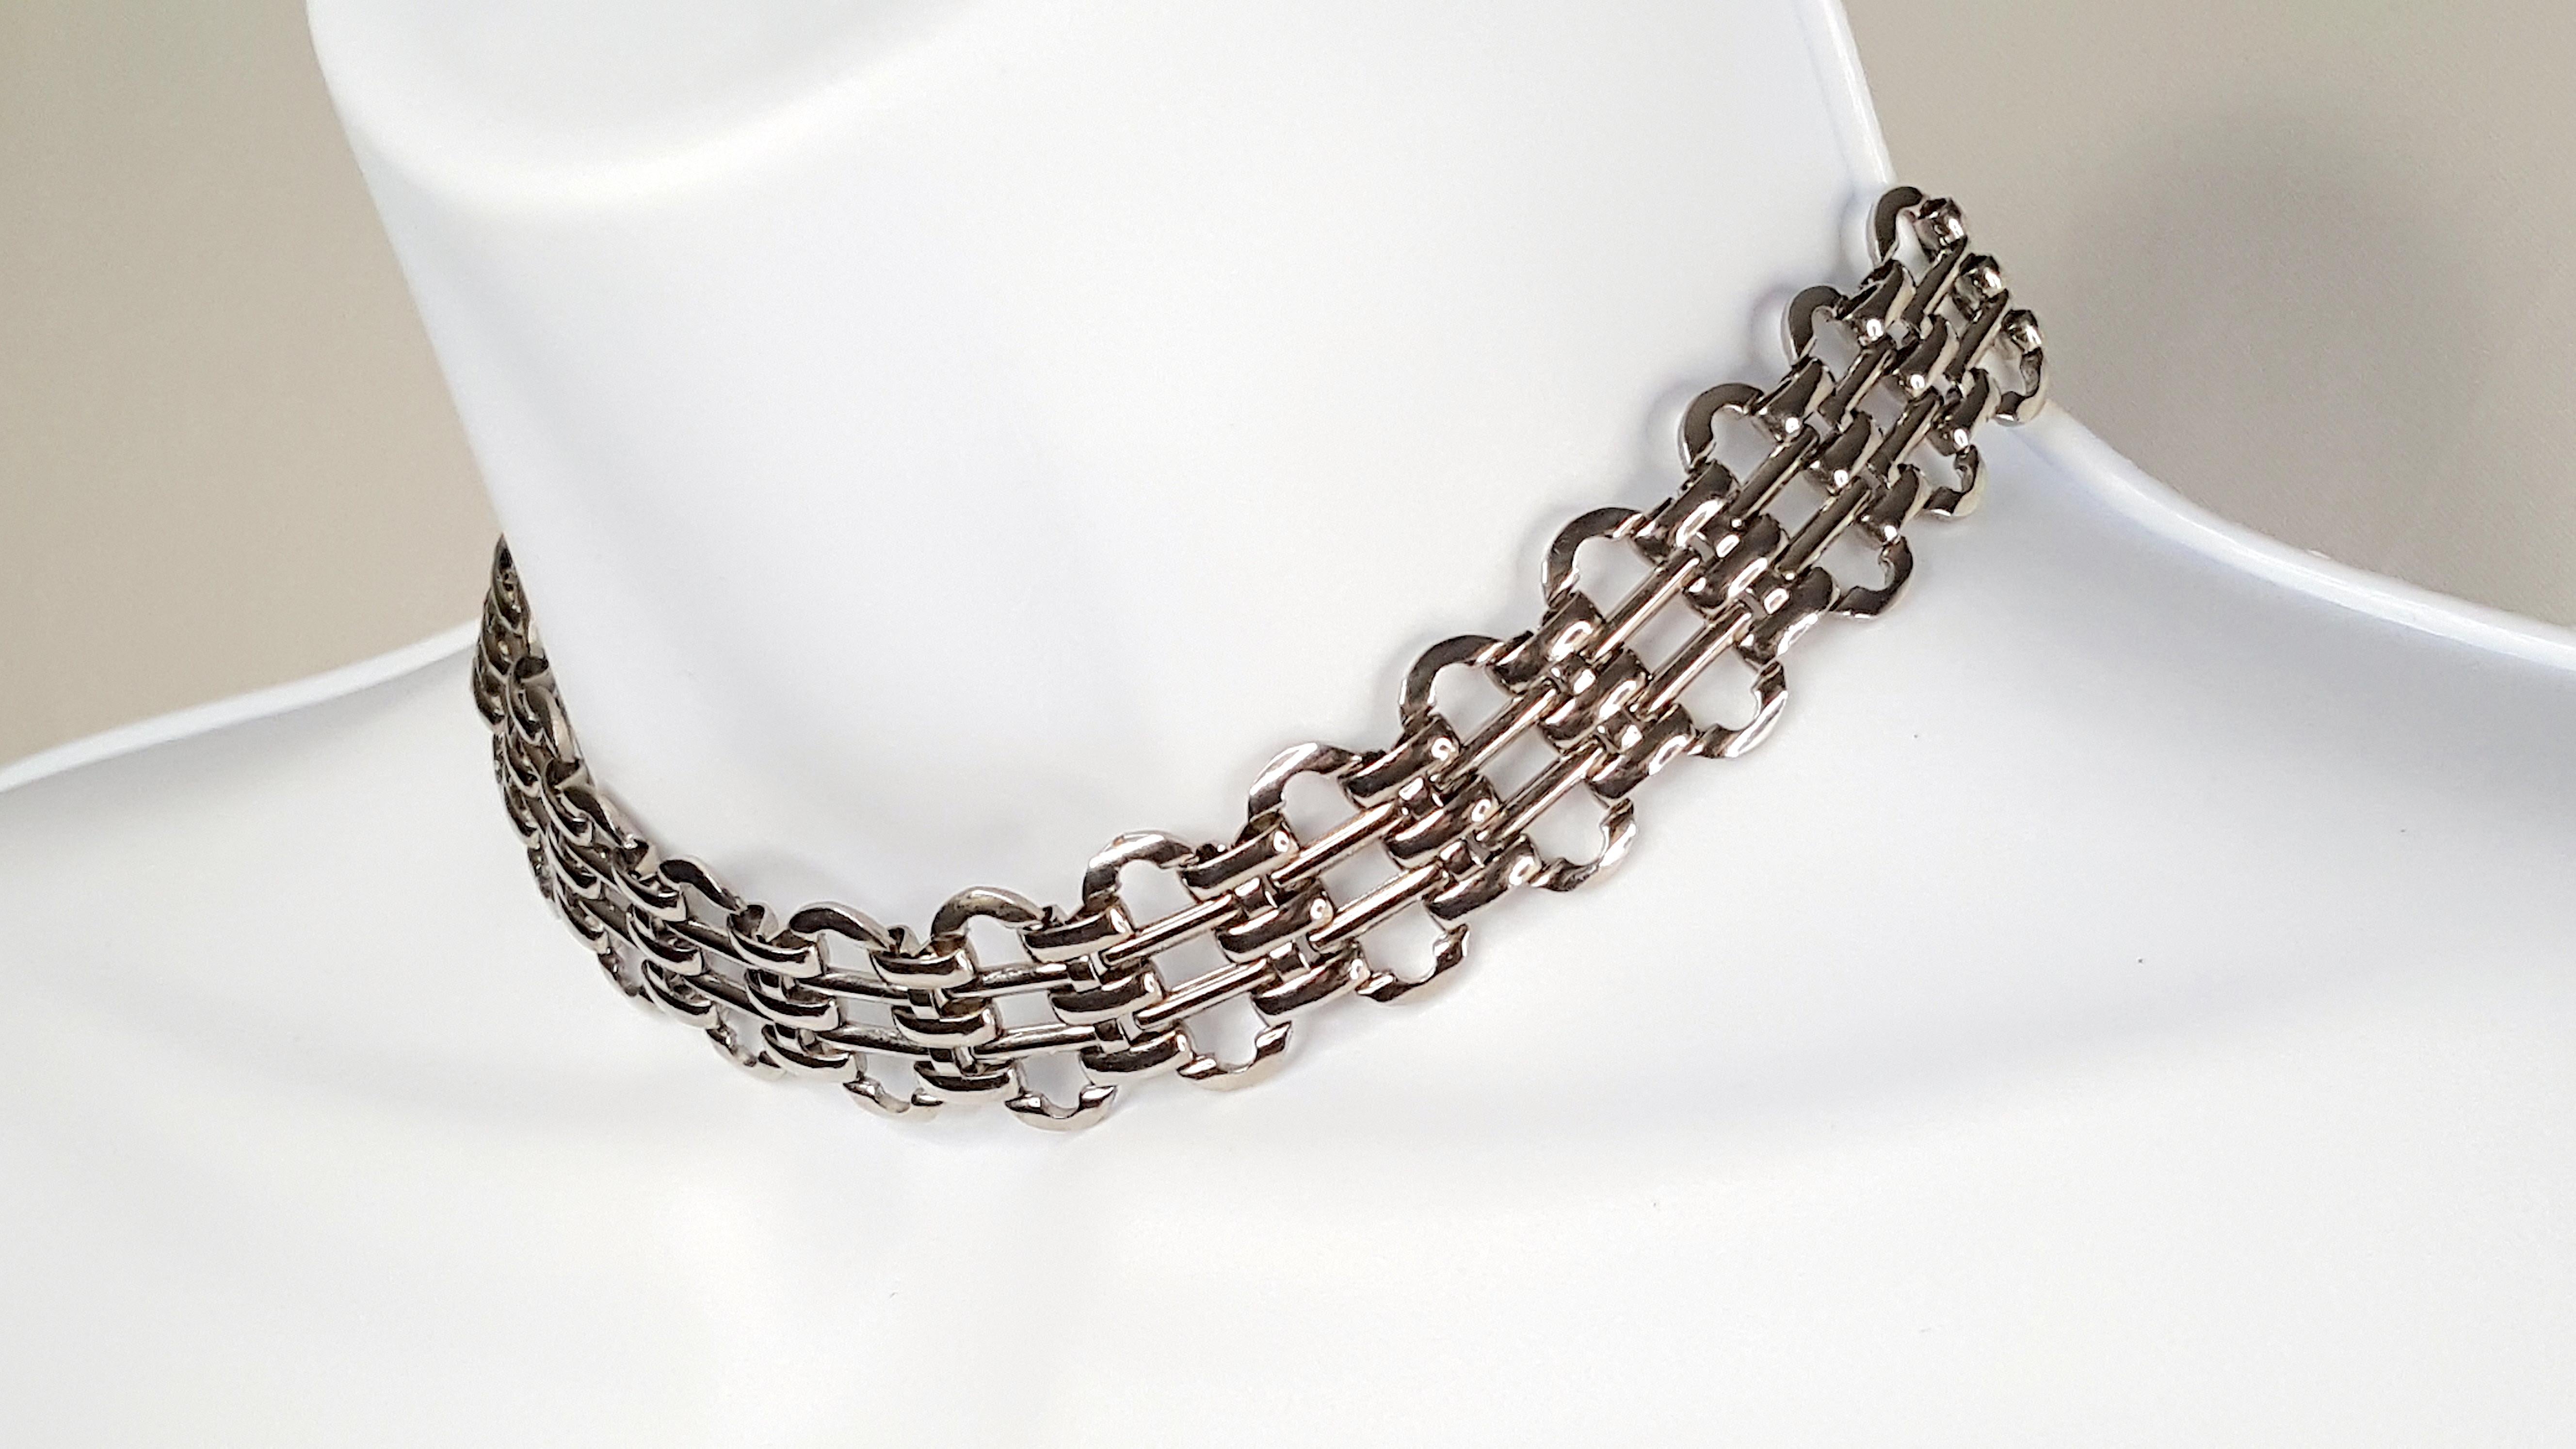 Victorian Belle-Epoque and Edwardian fine jewelry transitioned to Art-Deco period costume jewelry with semi-precious materials and machine-age shapes around WWI when this unique openwork 20-link choker necklace was made in only white gold instead of